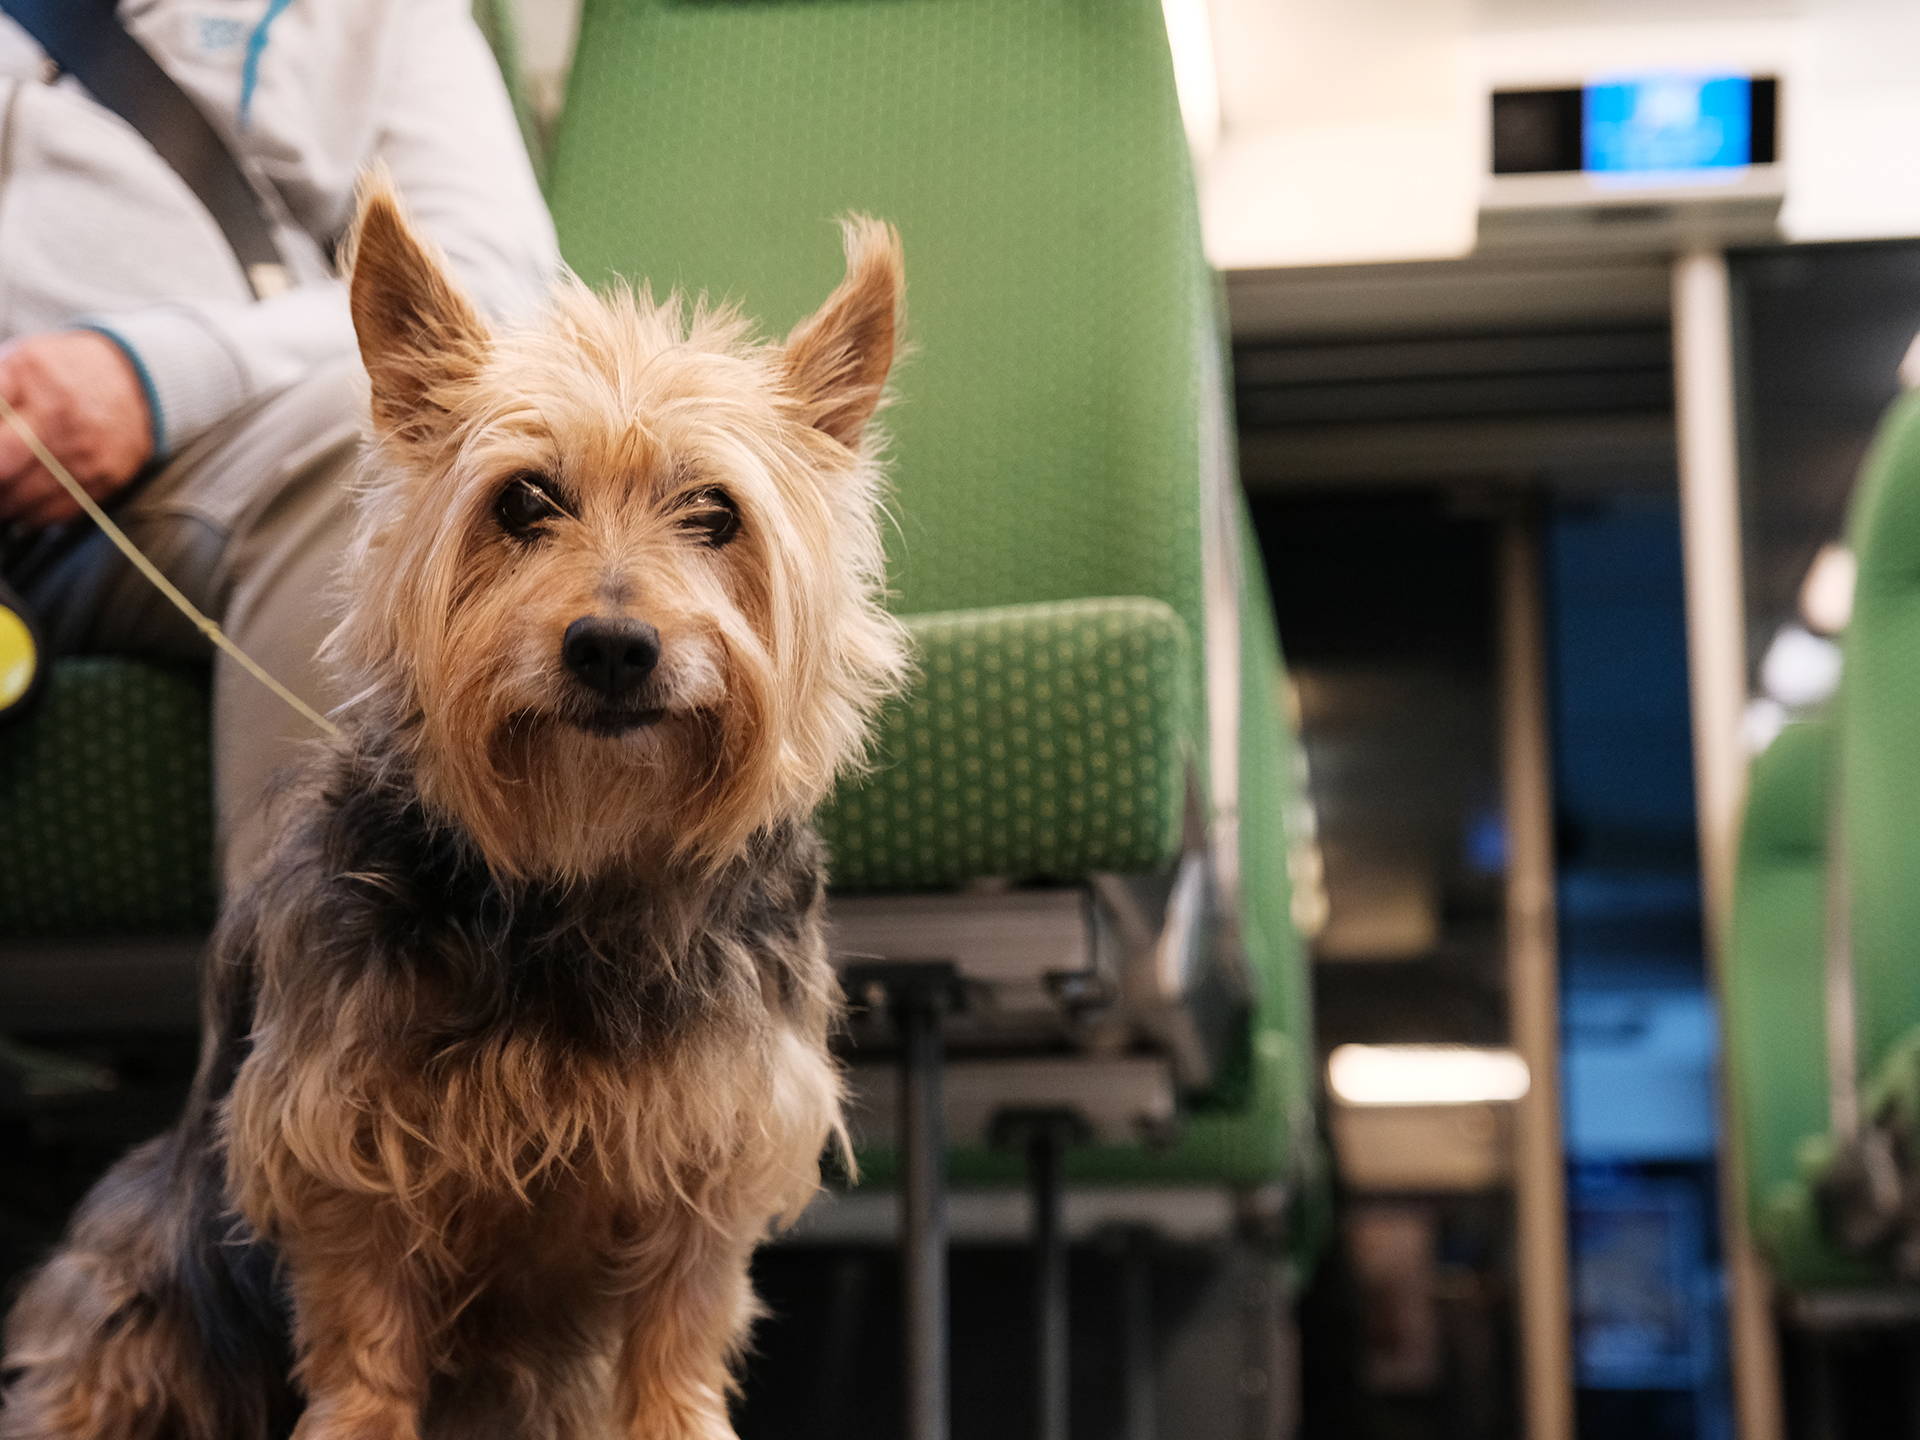 All our trains have seats for travelling smoothly with your dog, cat or other pet.